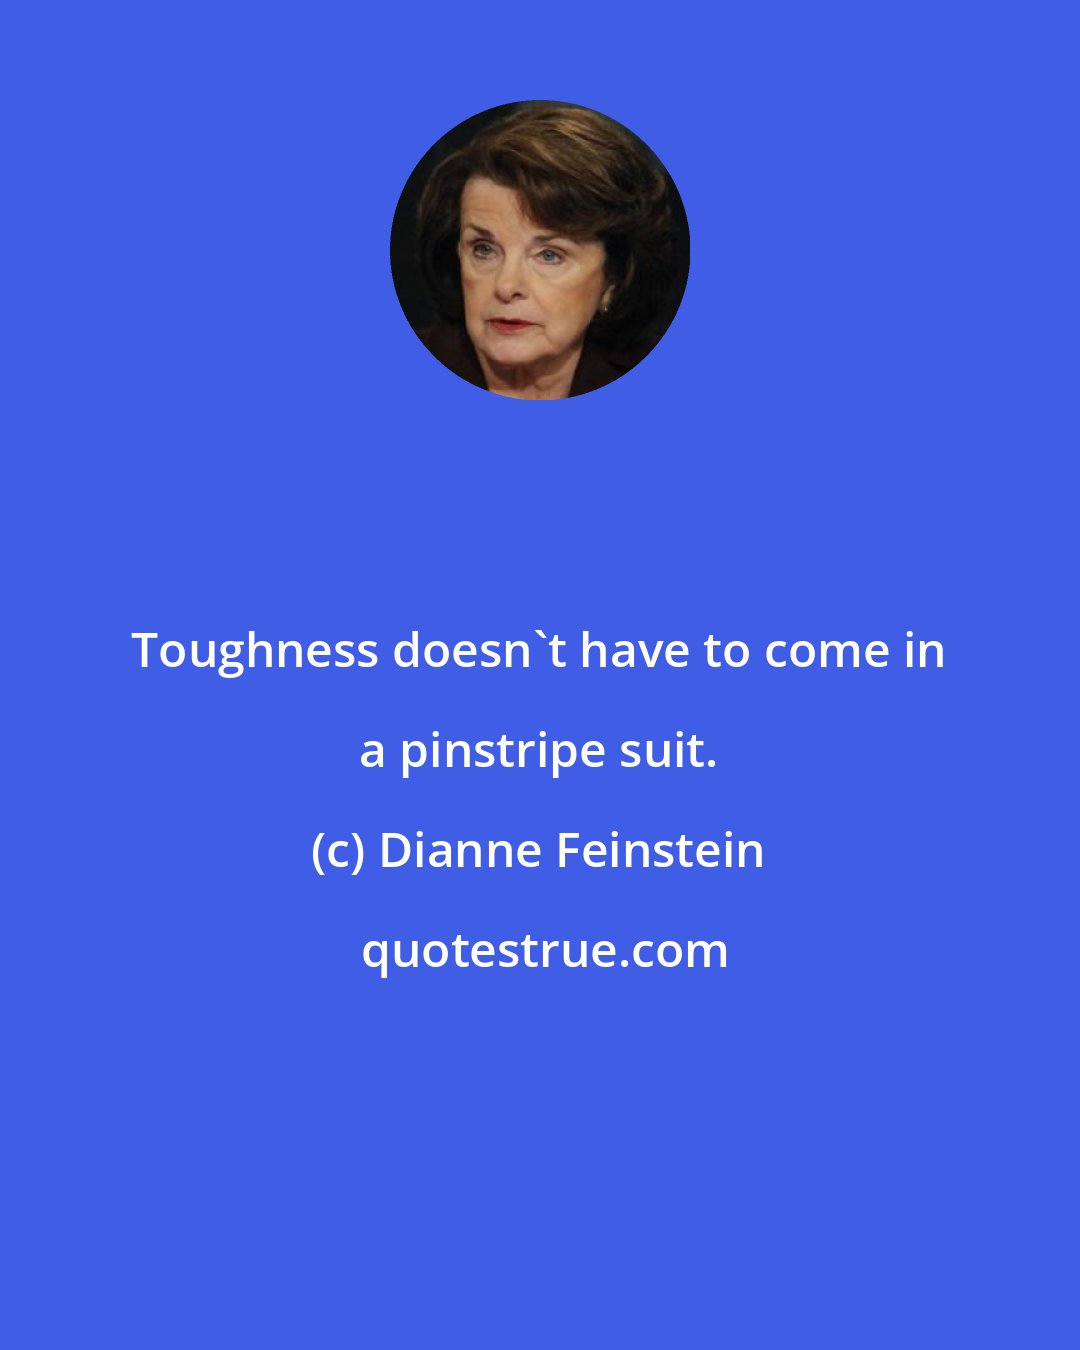 Dianne Feinstein: Toughness doesn't have to come in a pinstripe suit.